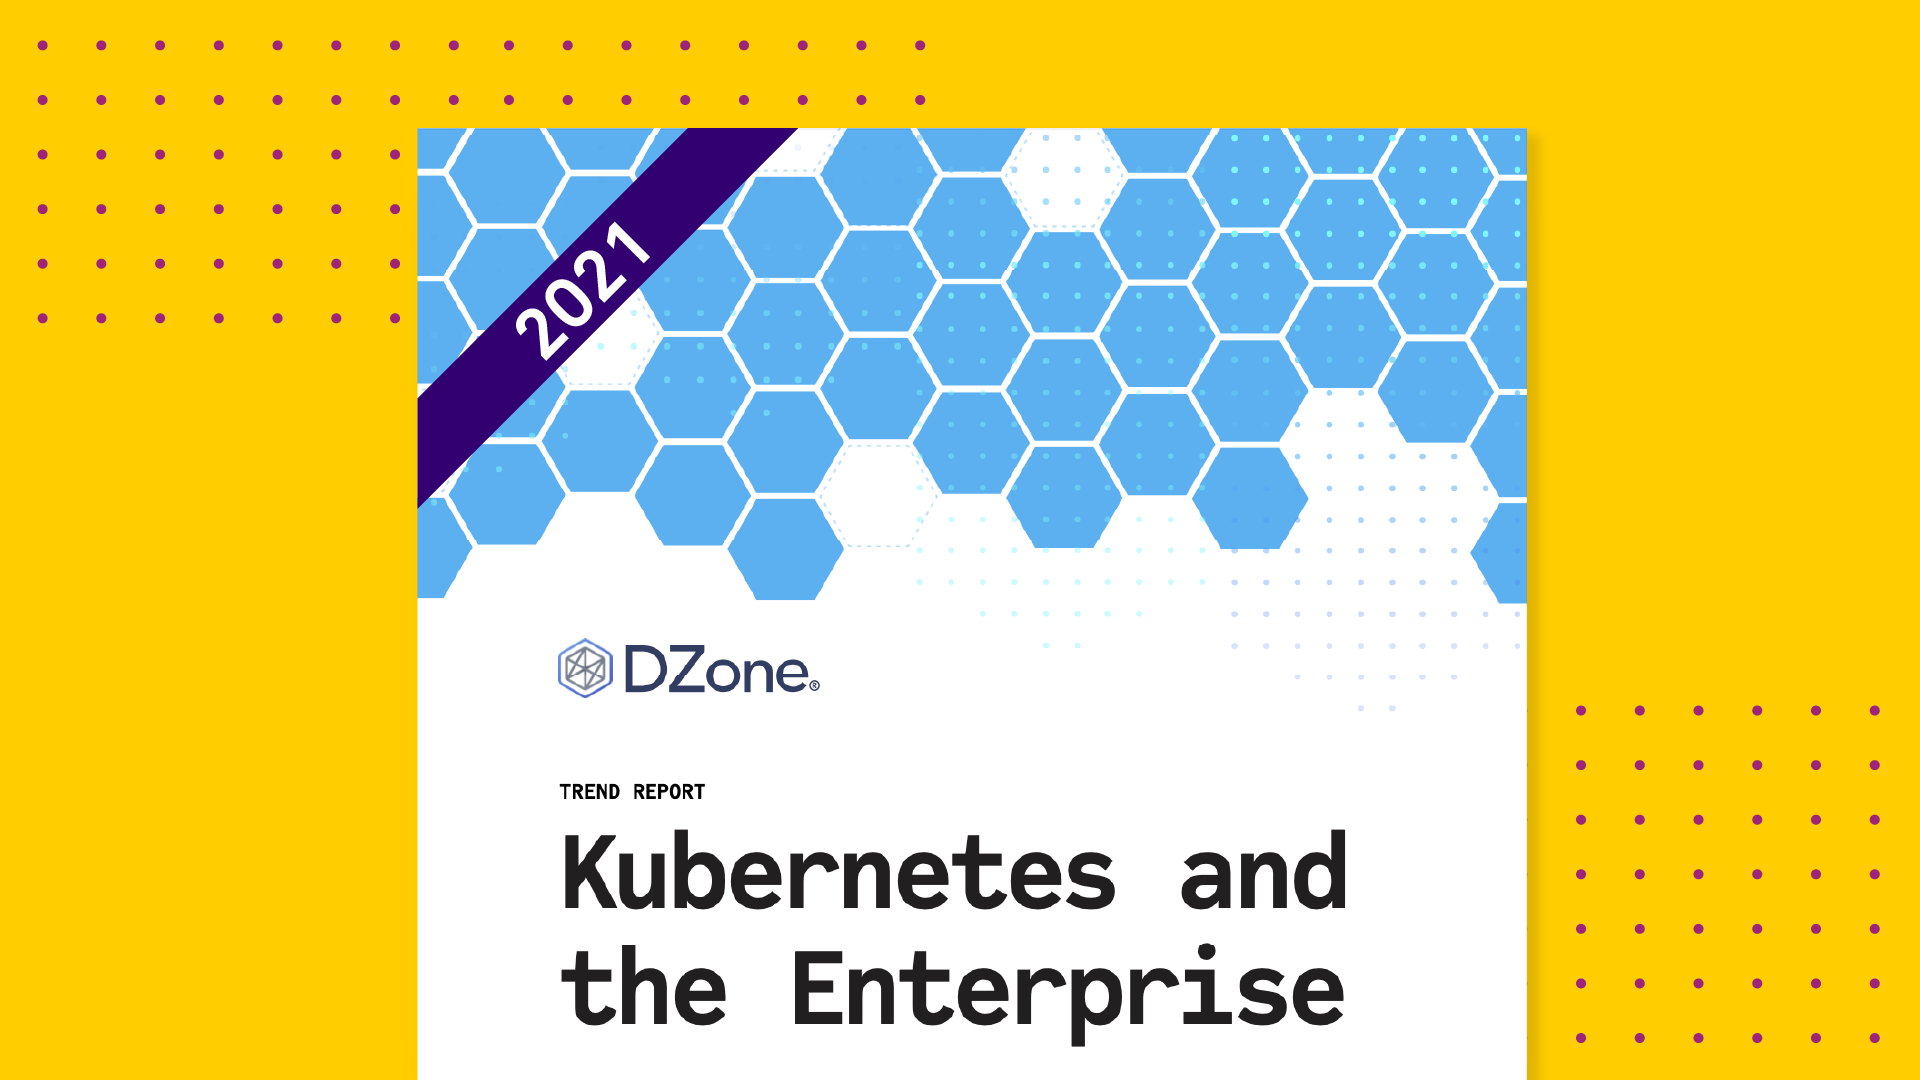 DZone Trend Report: Kubernetes and the Enterprise 2021